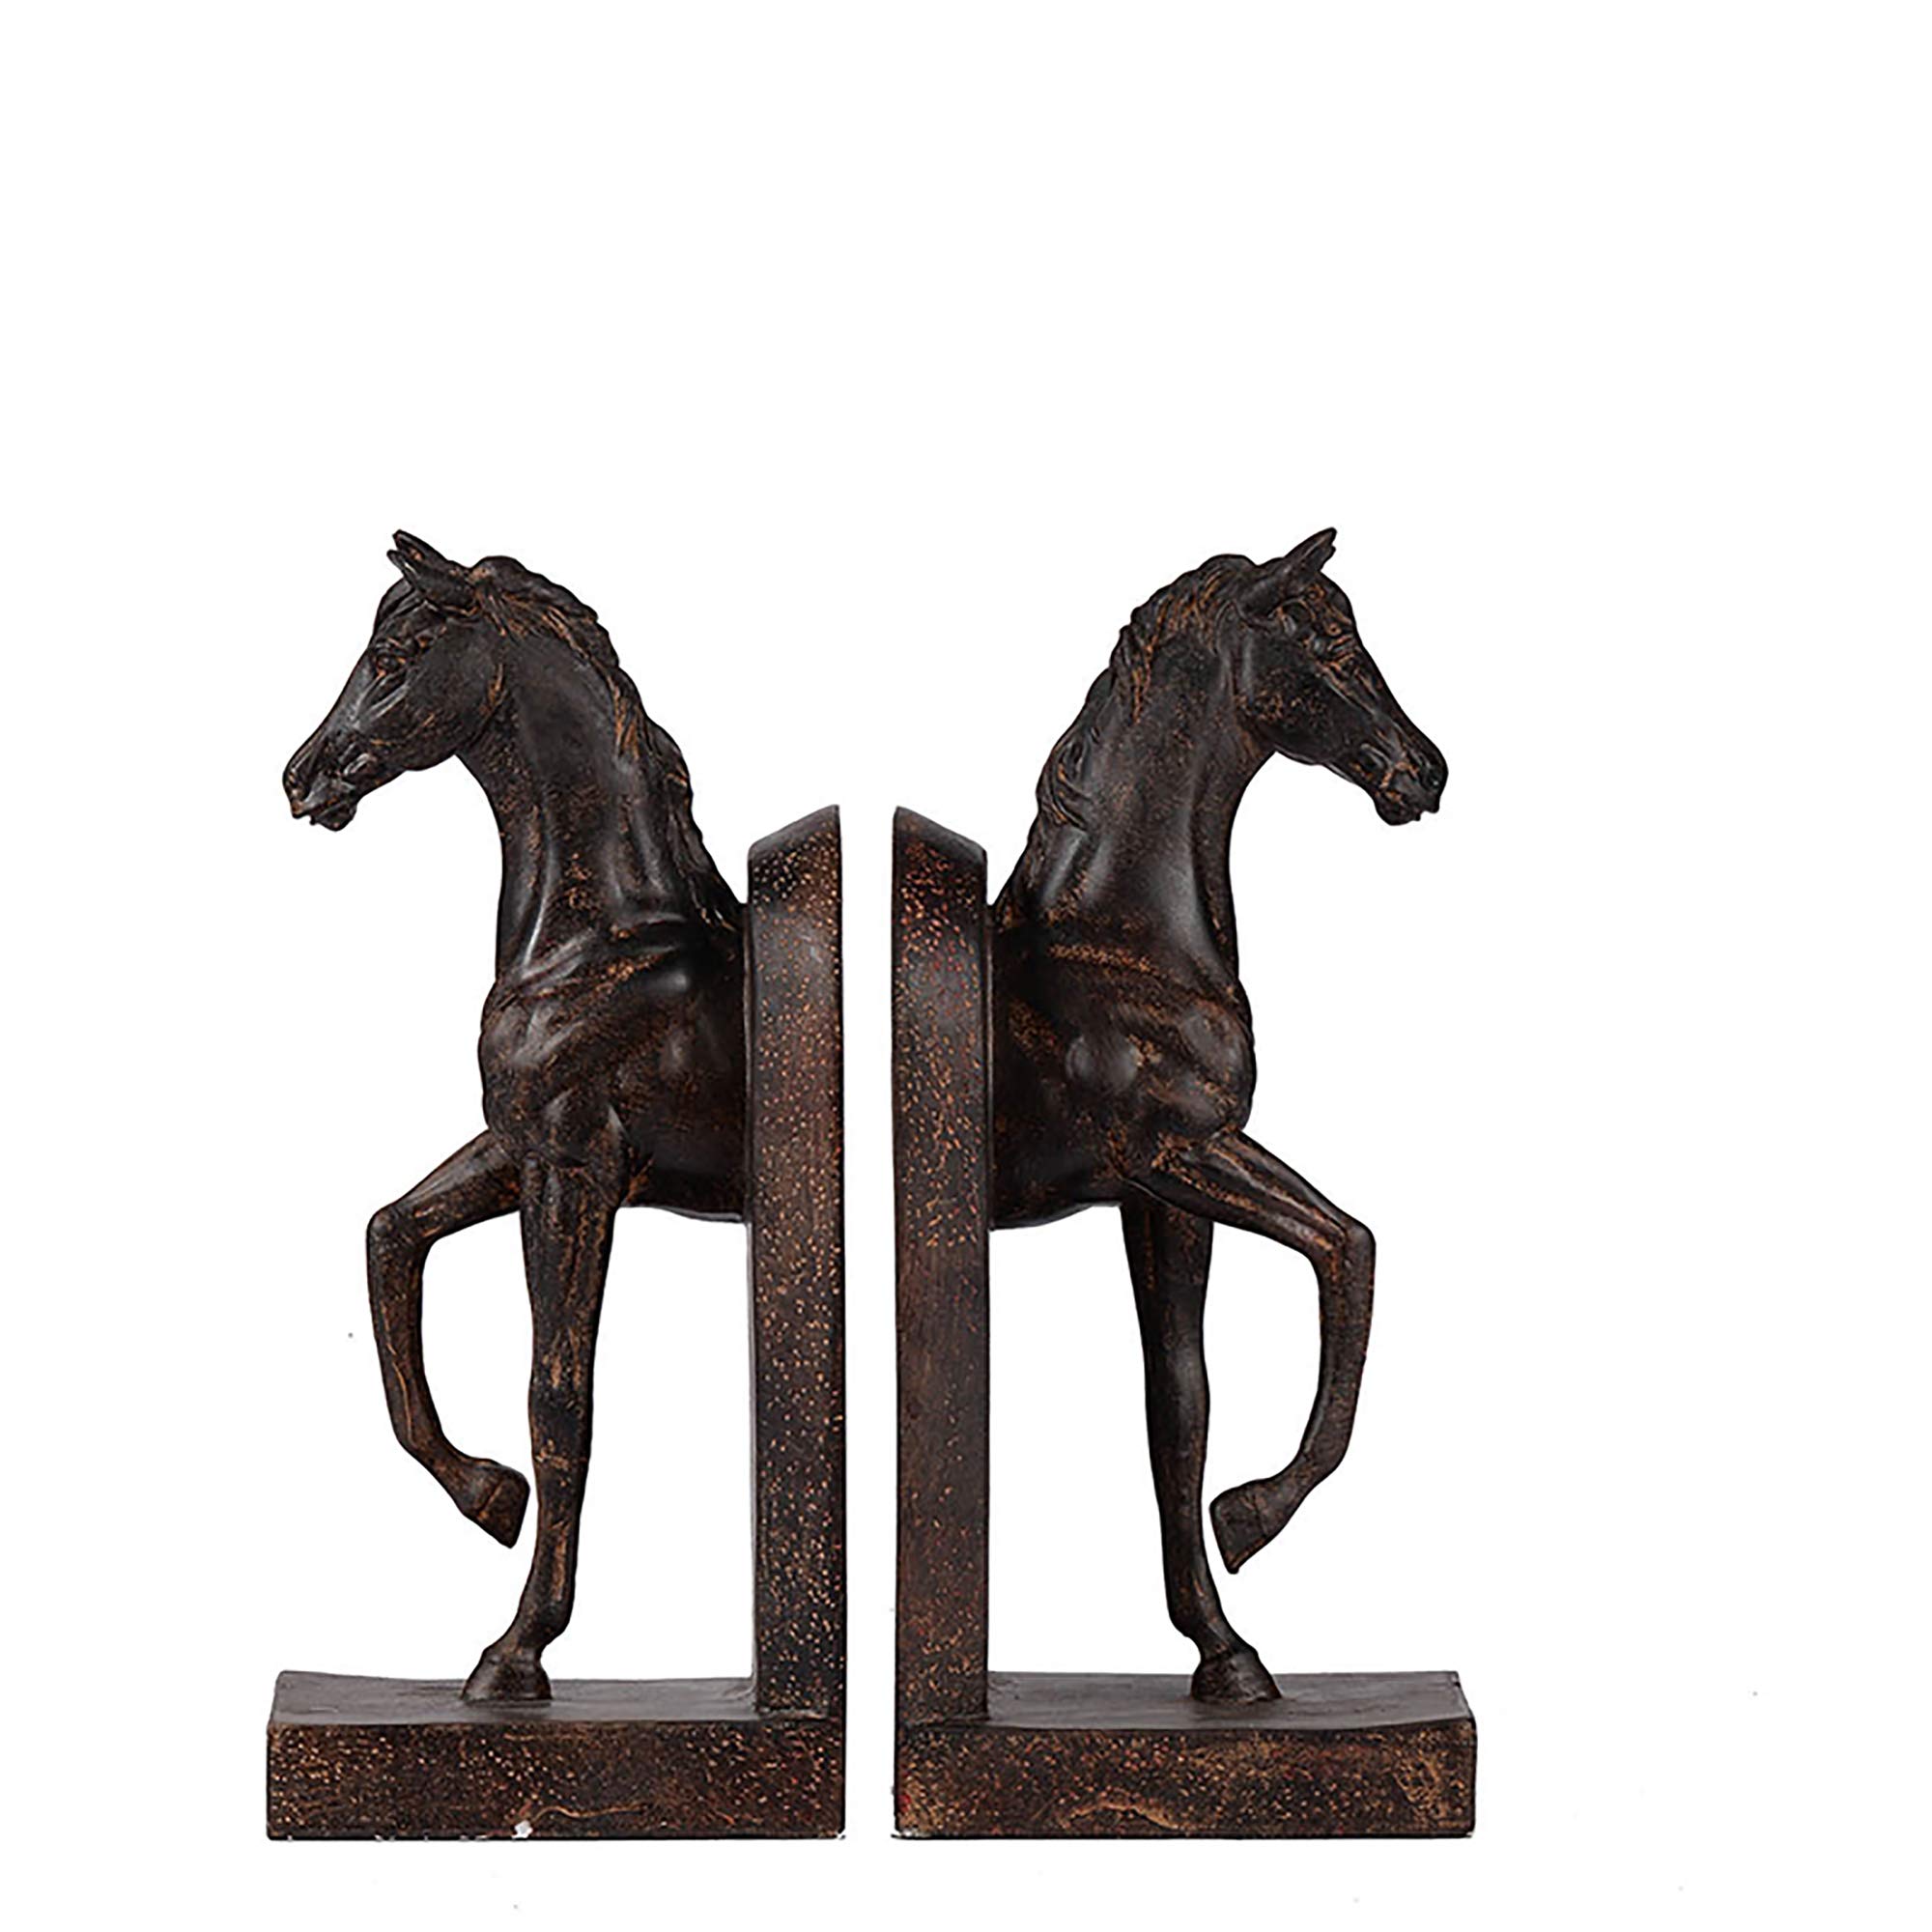 A&B Home Decorative Display Set of 2 Trotting Horse Bookends Decoration Library Office Home Décor Book Shelf Accent 11" inch